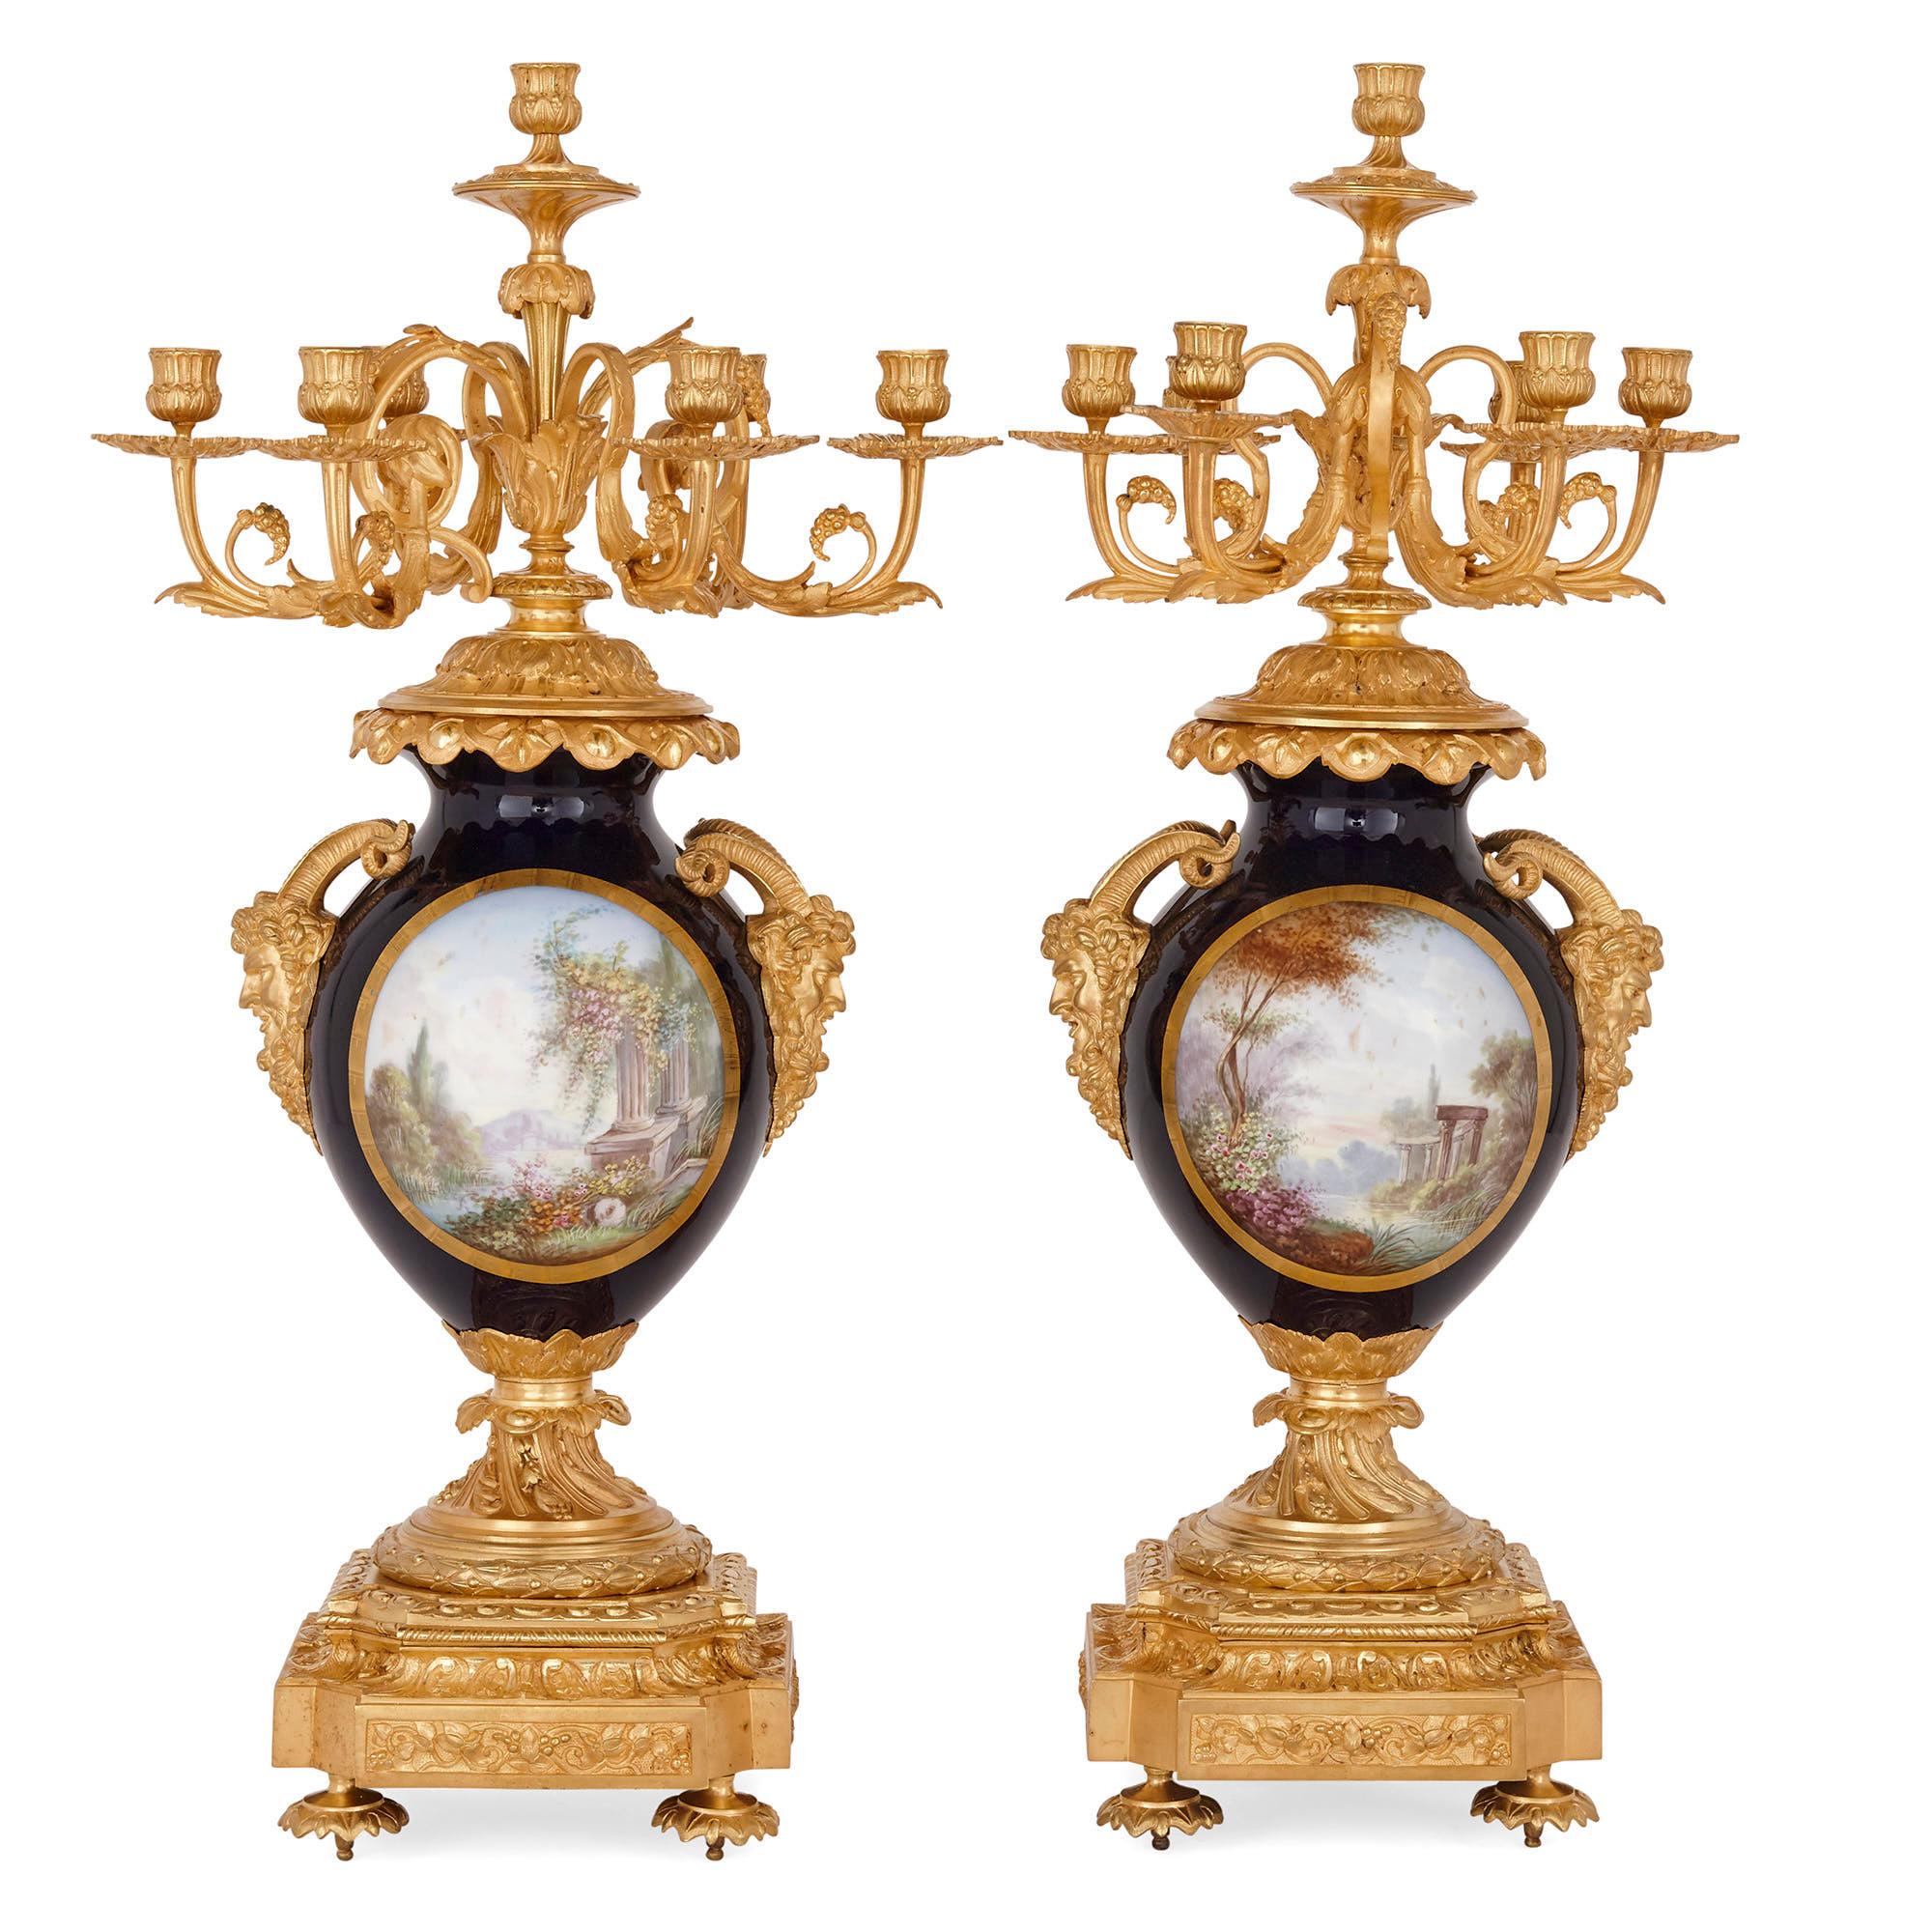 19th Century Three-Piece Louis XV Rococo Style Porcelain and Ormolu Clock Set For Sale